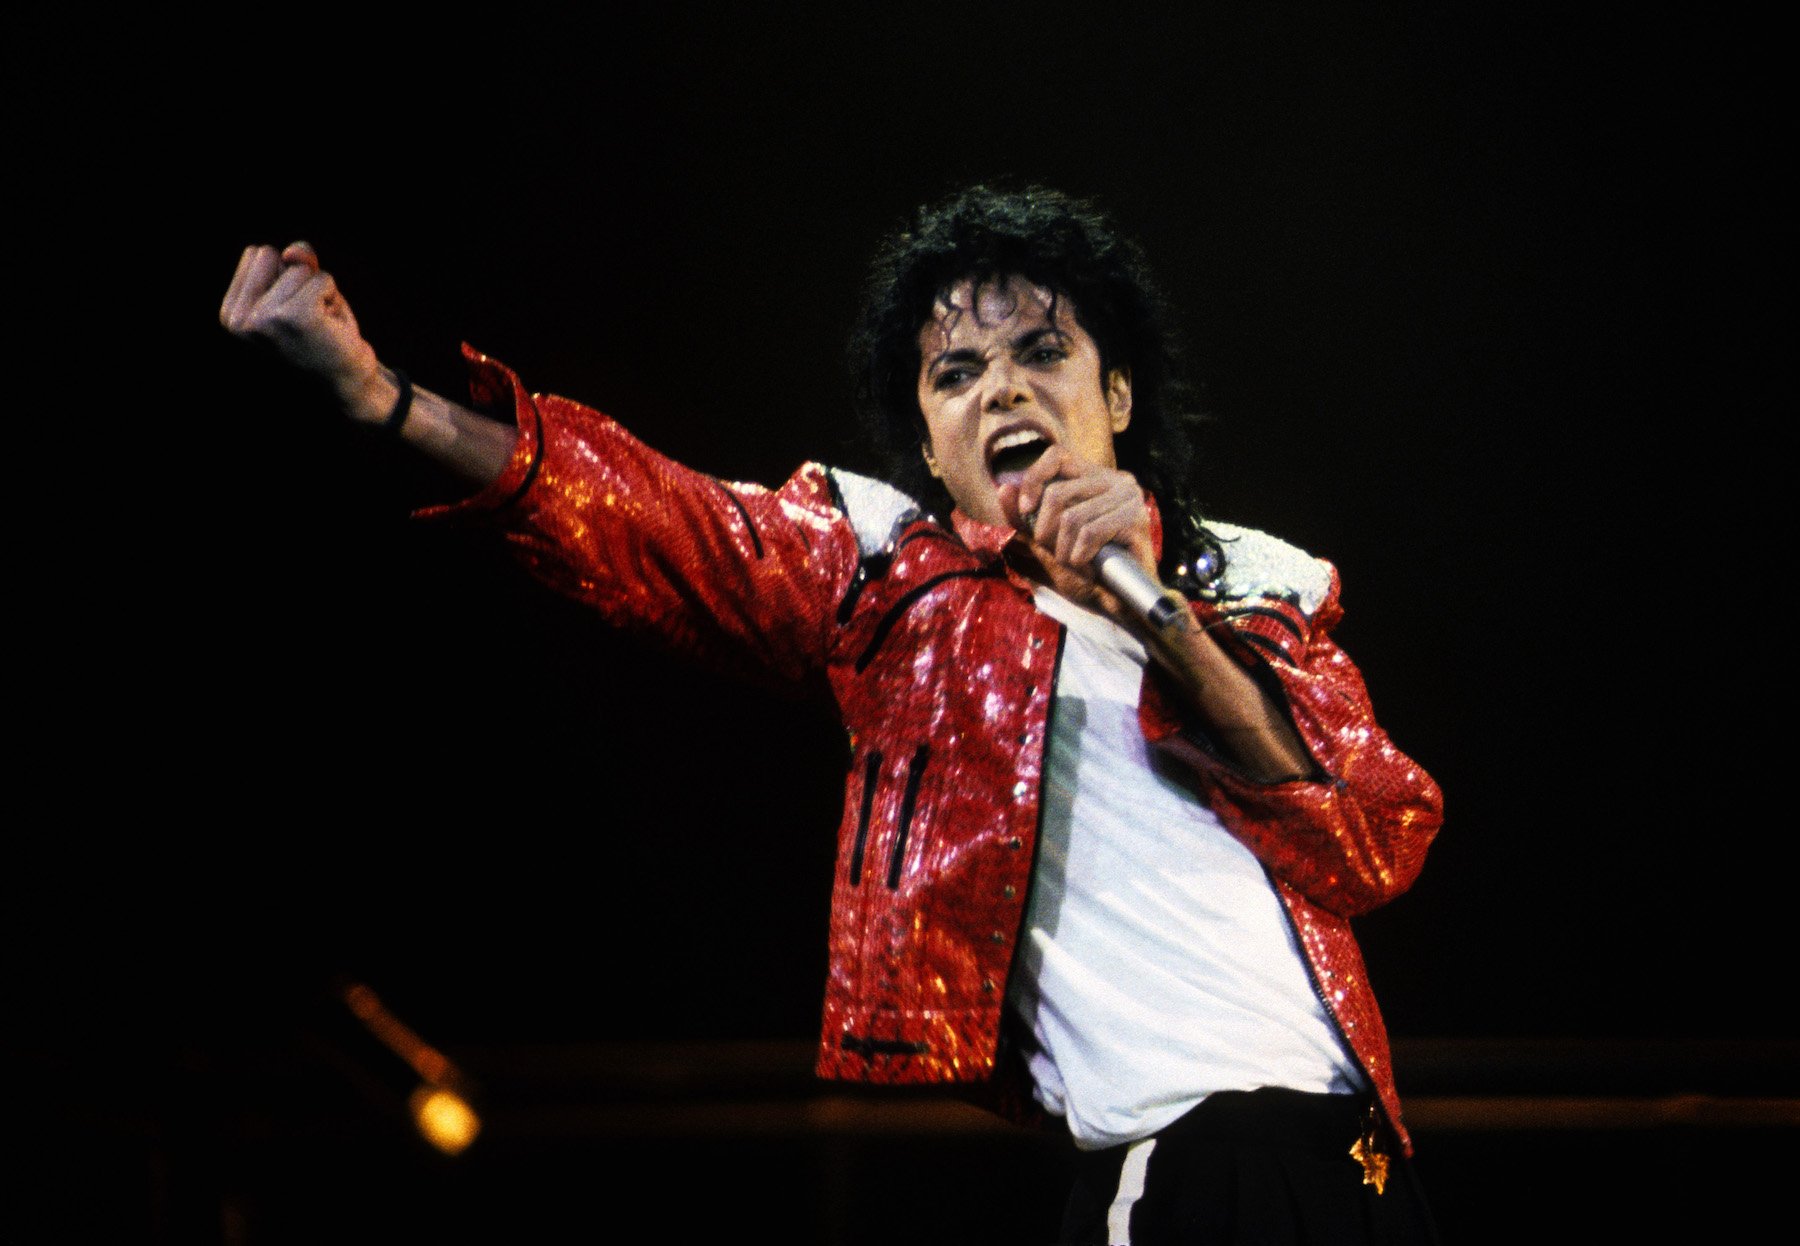 Michael Jackson, whose nephew will play him in a biopic, wearing a red jacket on stage